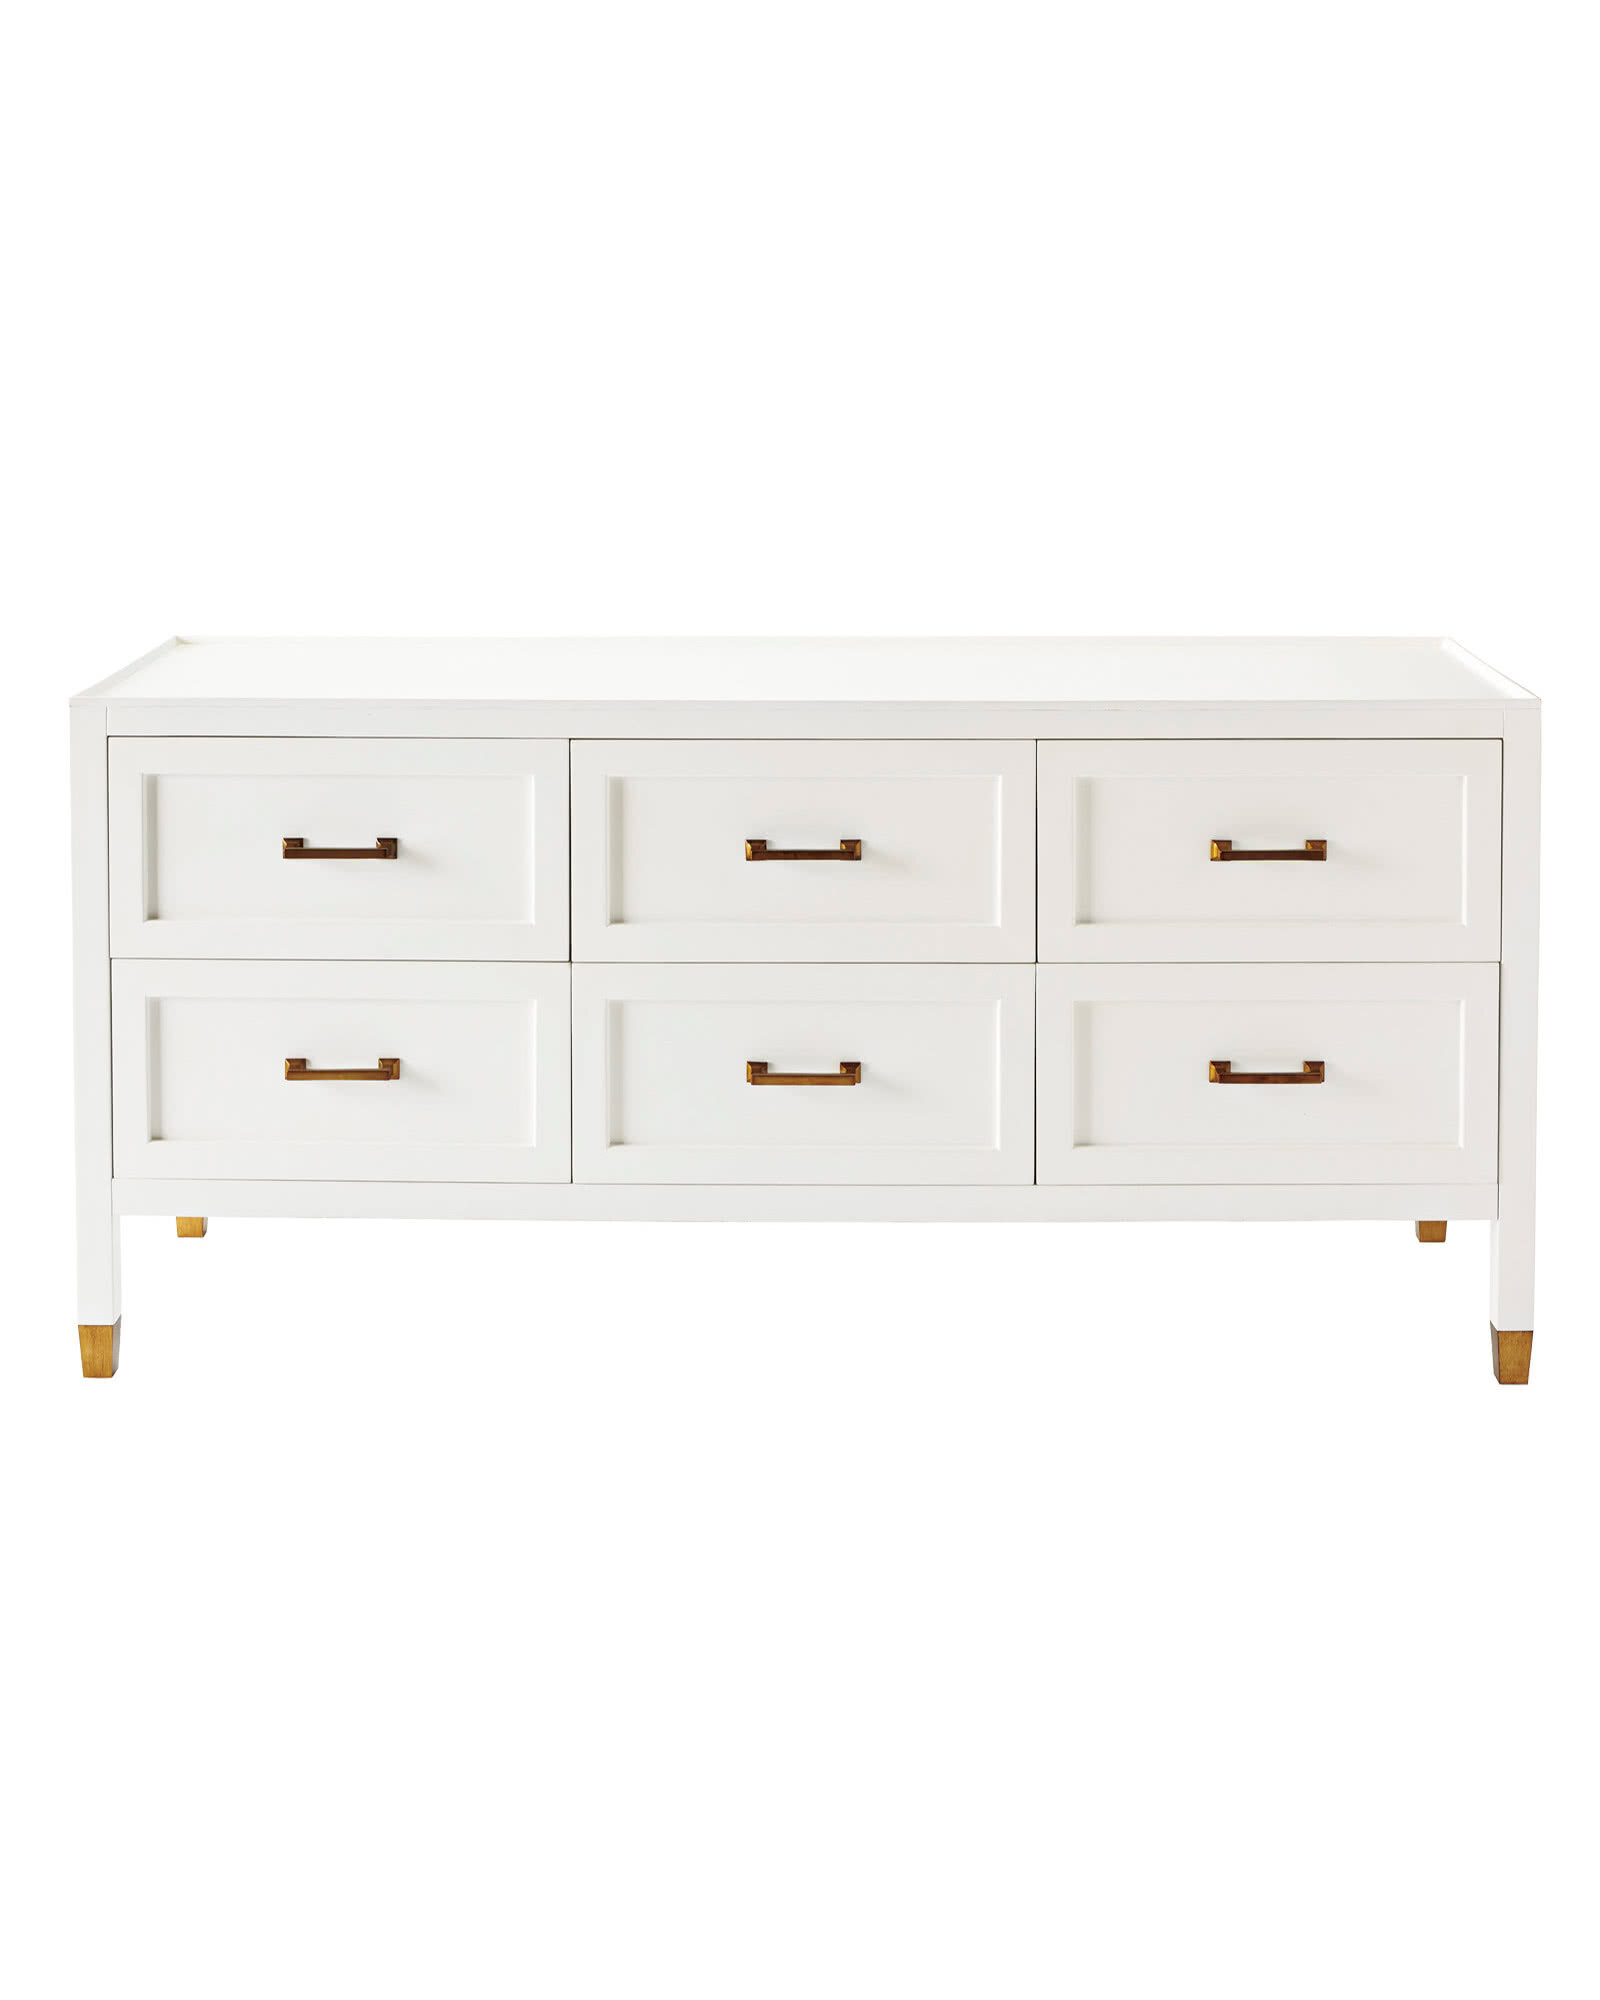 Furn_Dresser_Pierson_Lacquered_Wide - Serena and Lily.jpeg